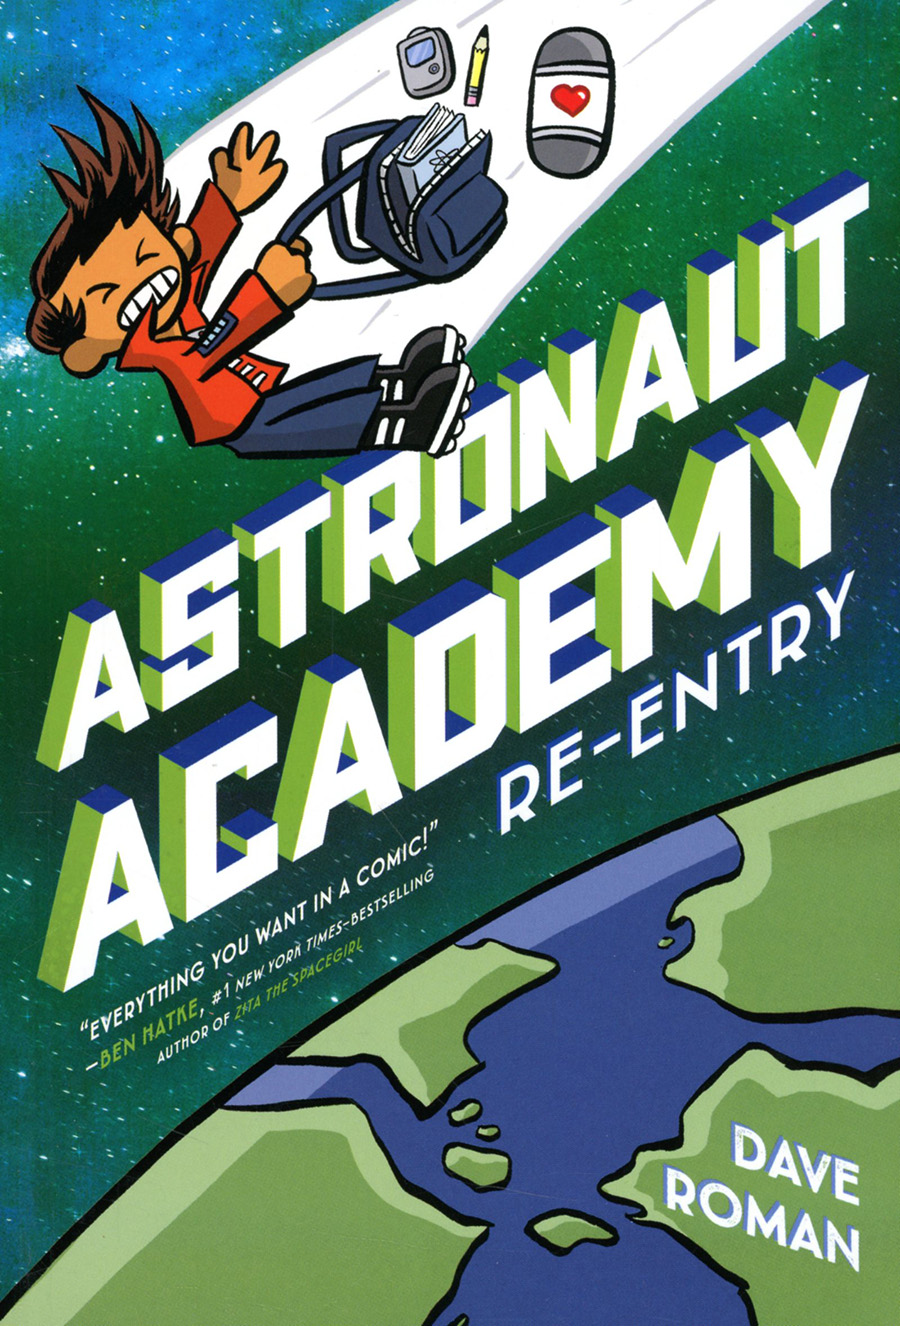 Astronaut Academy Vol 2 Re-Entry TP